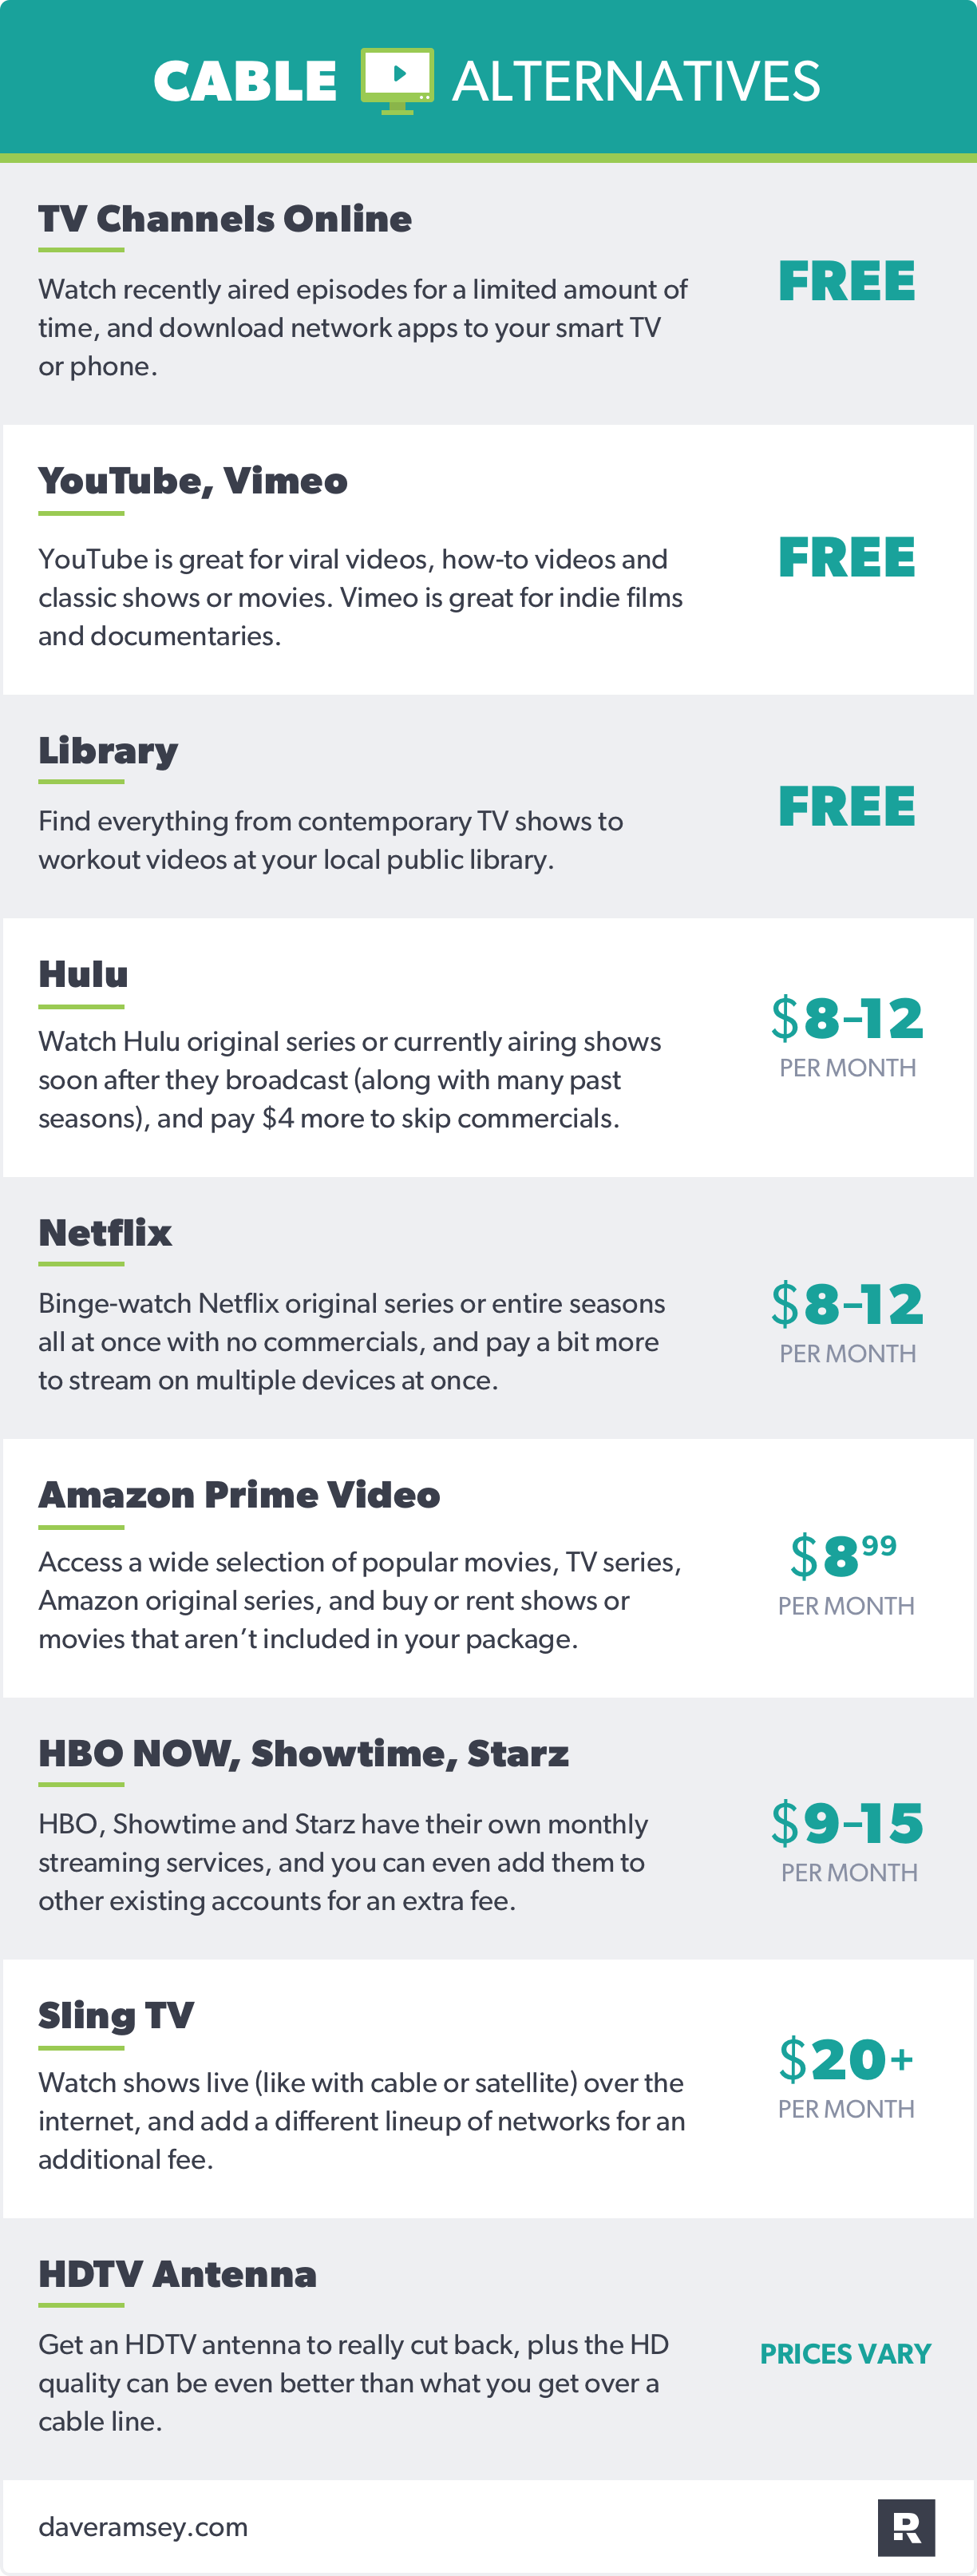 9 Cost-Effective Alternatives to Cable TV | DaveRamsey.com1224 x 3226